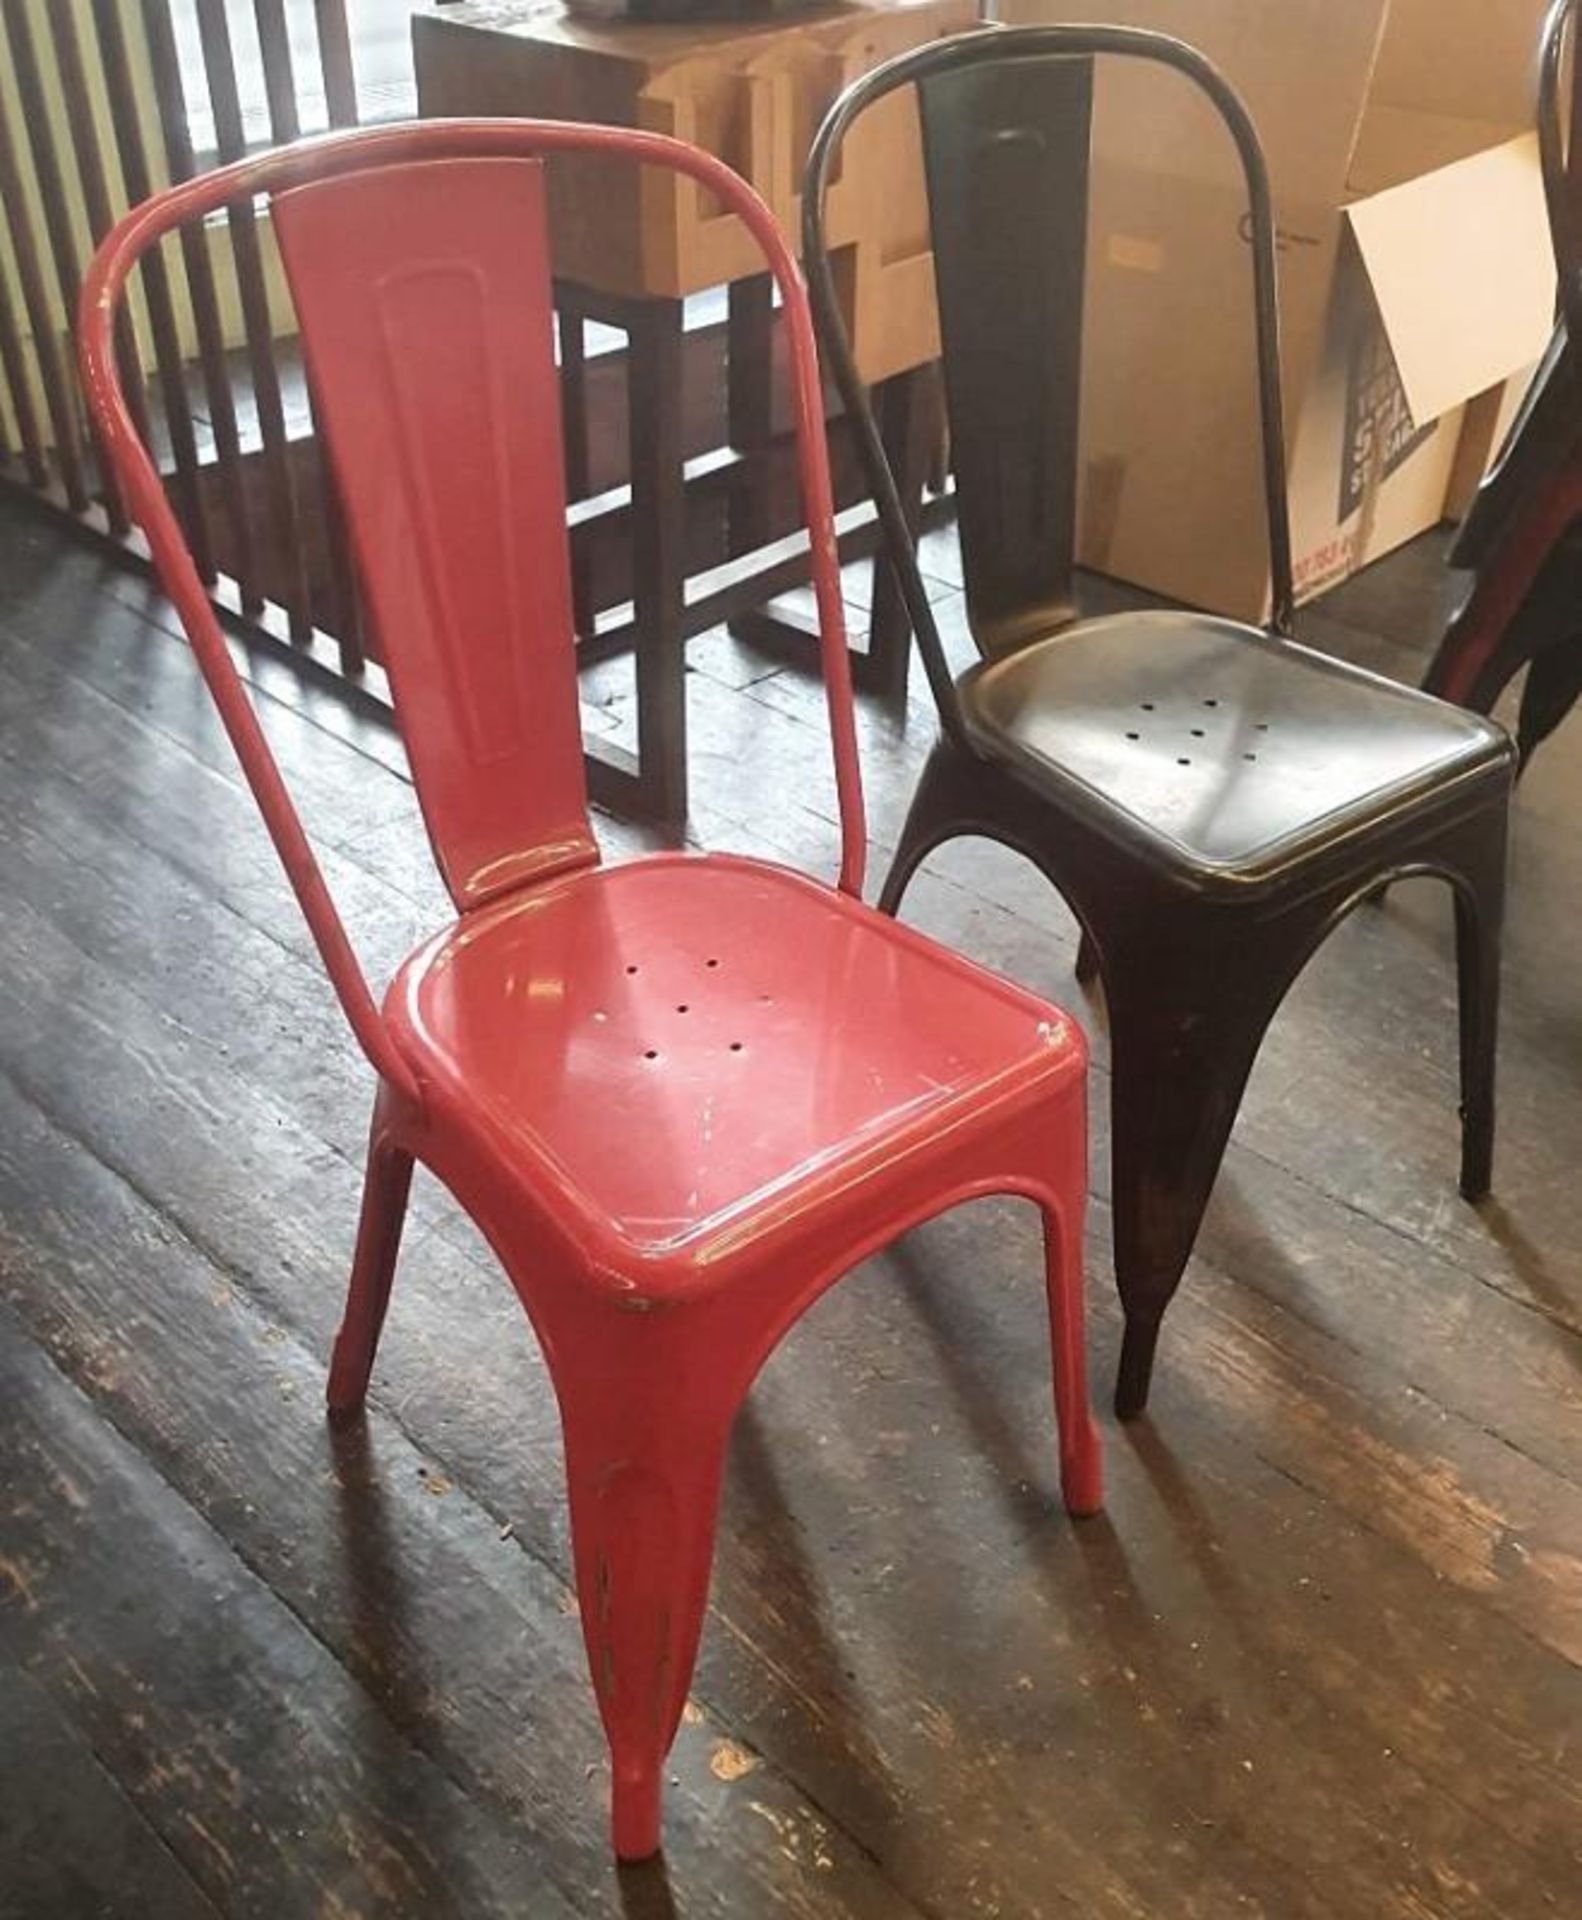 6 x Assorted Rustic Metal Bistro Chairs - Includes 2 x In Red, And 4 x In Black - Recently Taken Fro